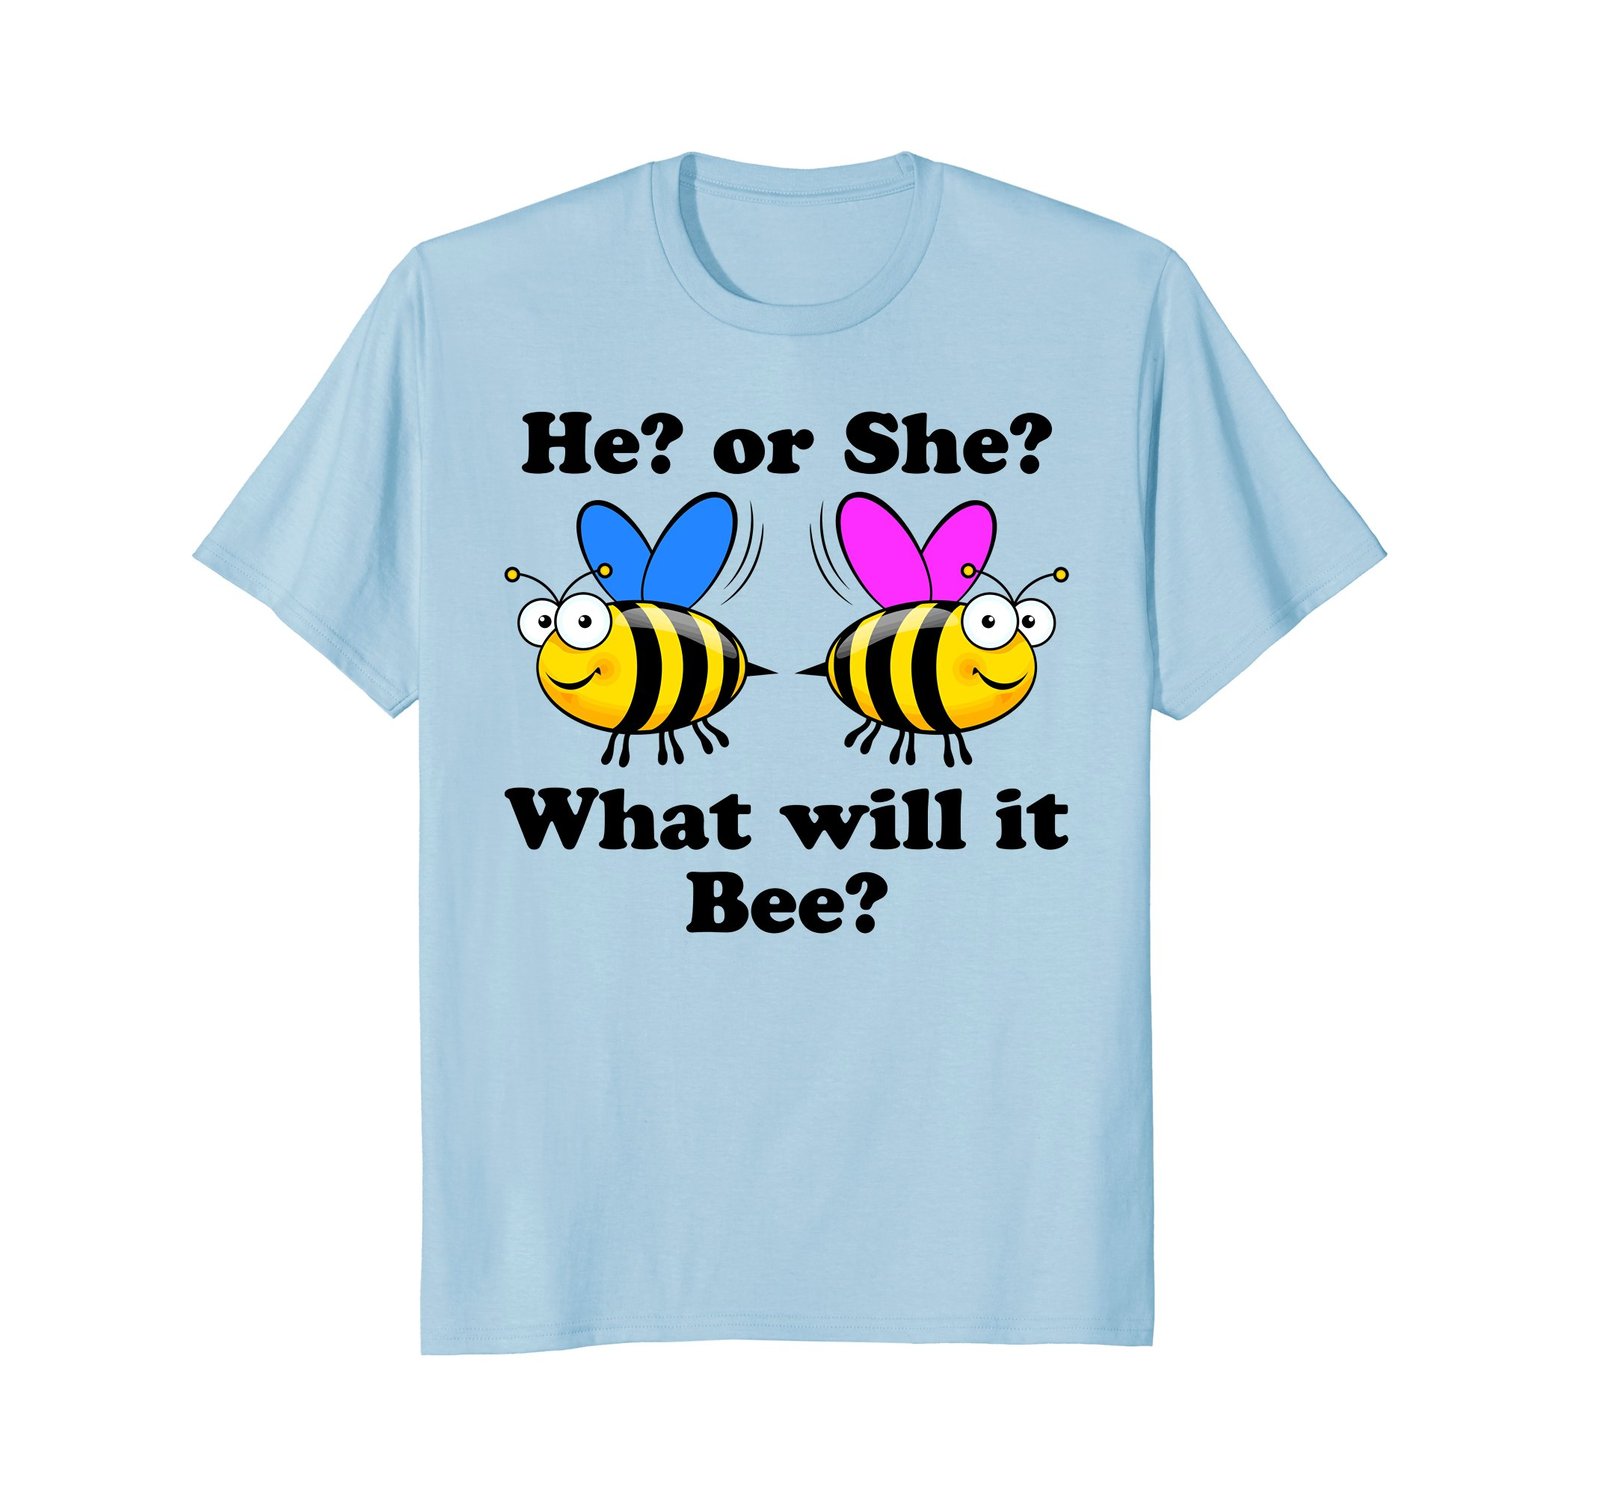 Funny Shirts - He Or She What Will It Bee - Gender Reveal T- Shirt Men ...